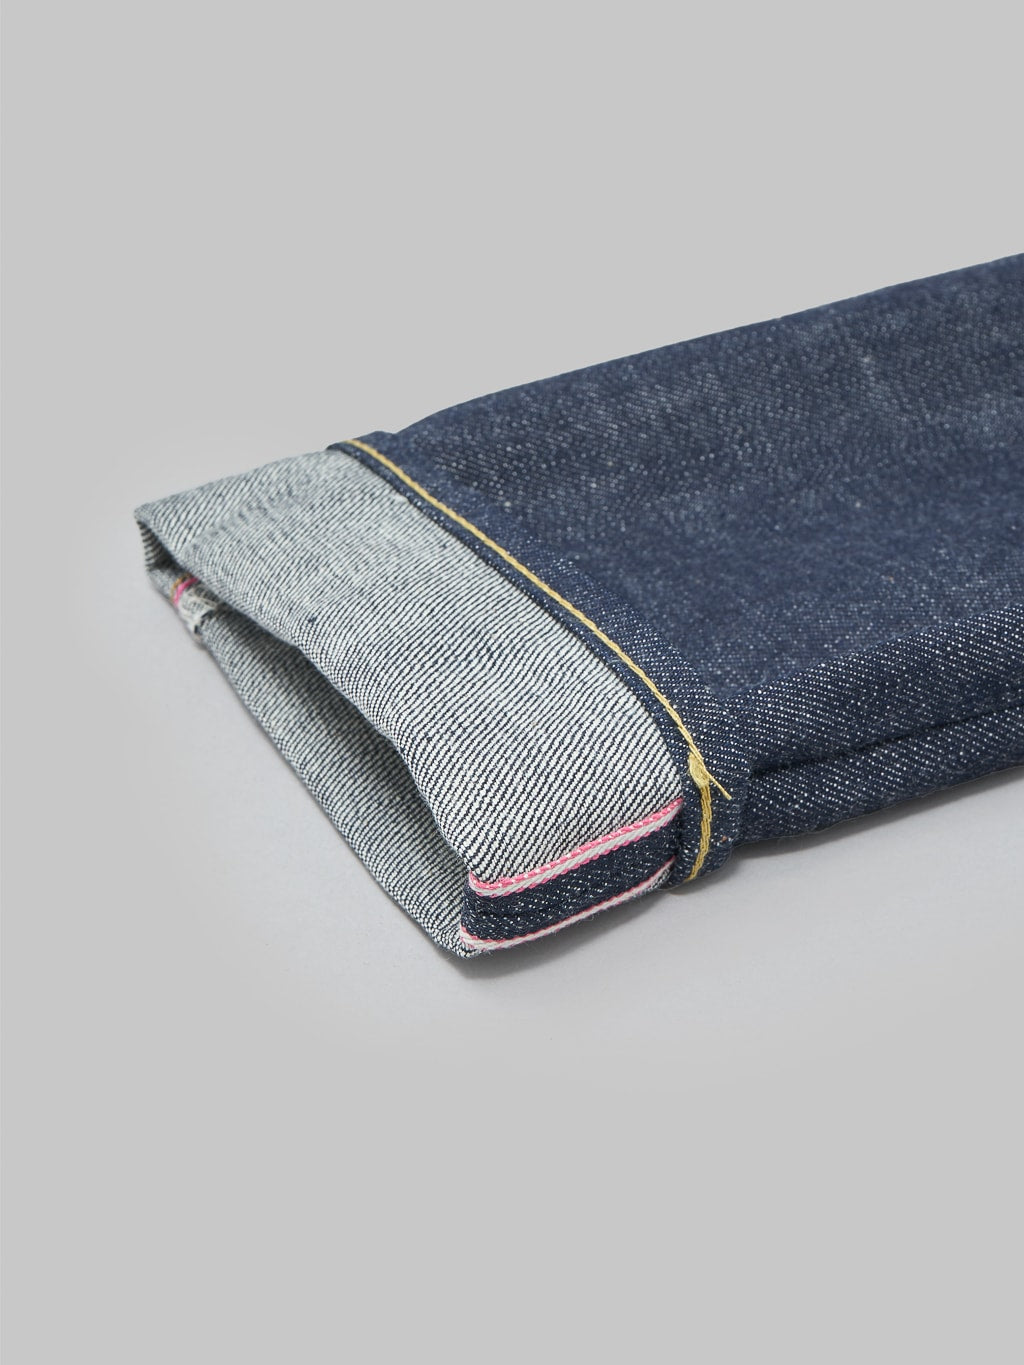 Momotaro legacy blue high tapered jeans weft fabric